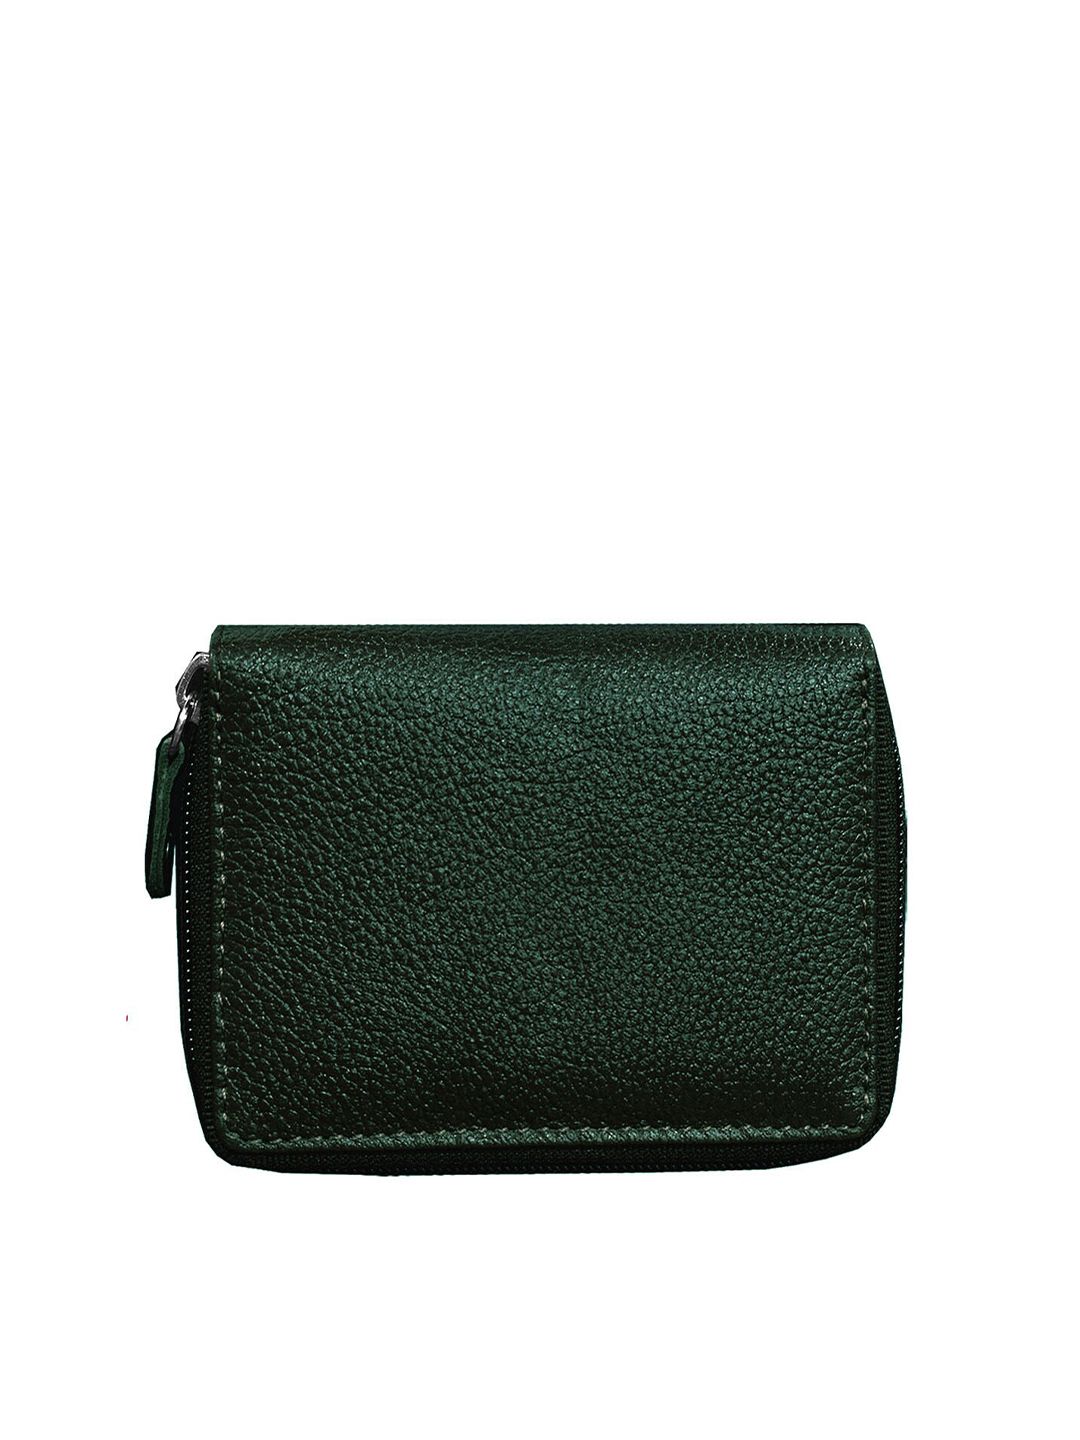 ABYS Unisex Green Textured Leather Zip Around Wallet Price in India